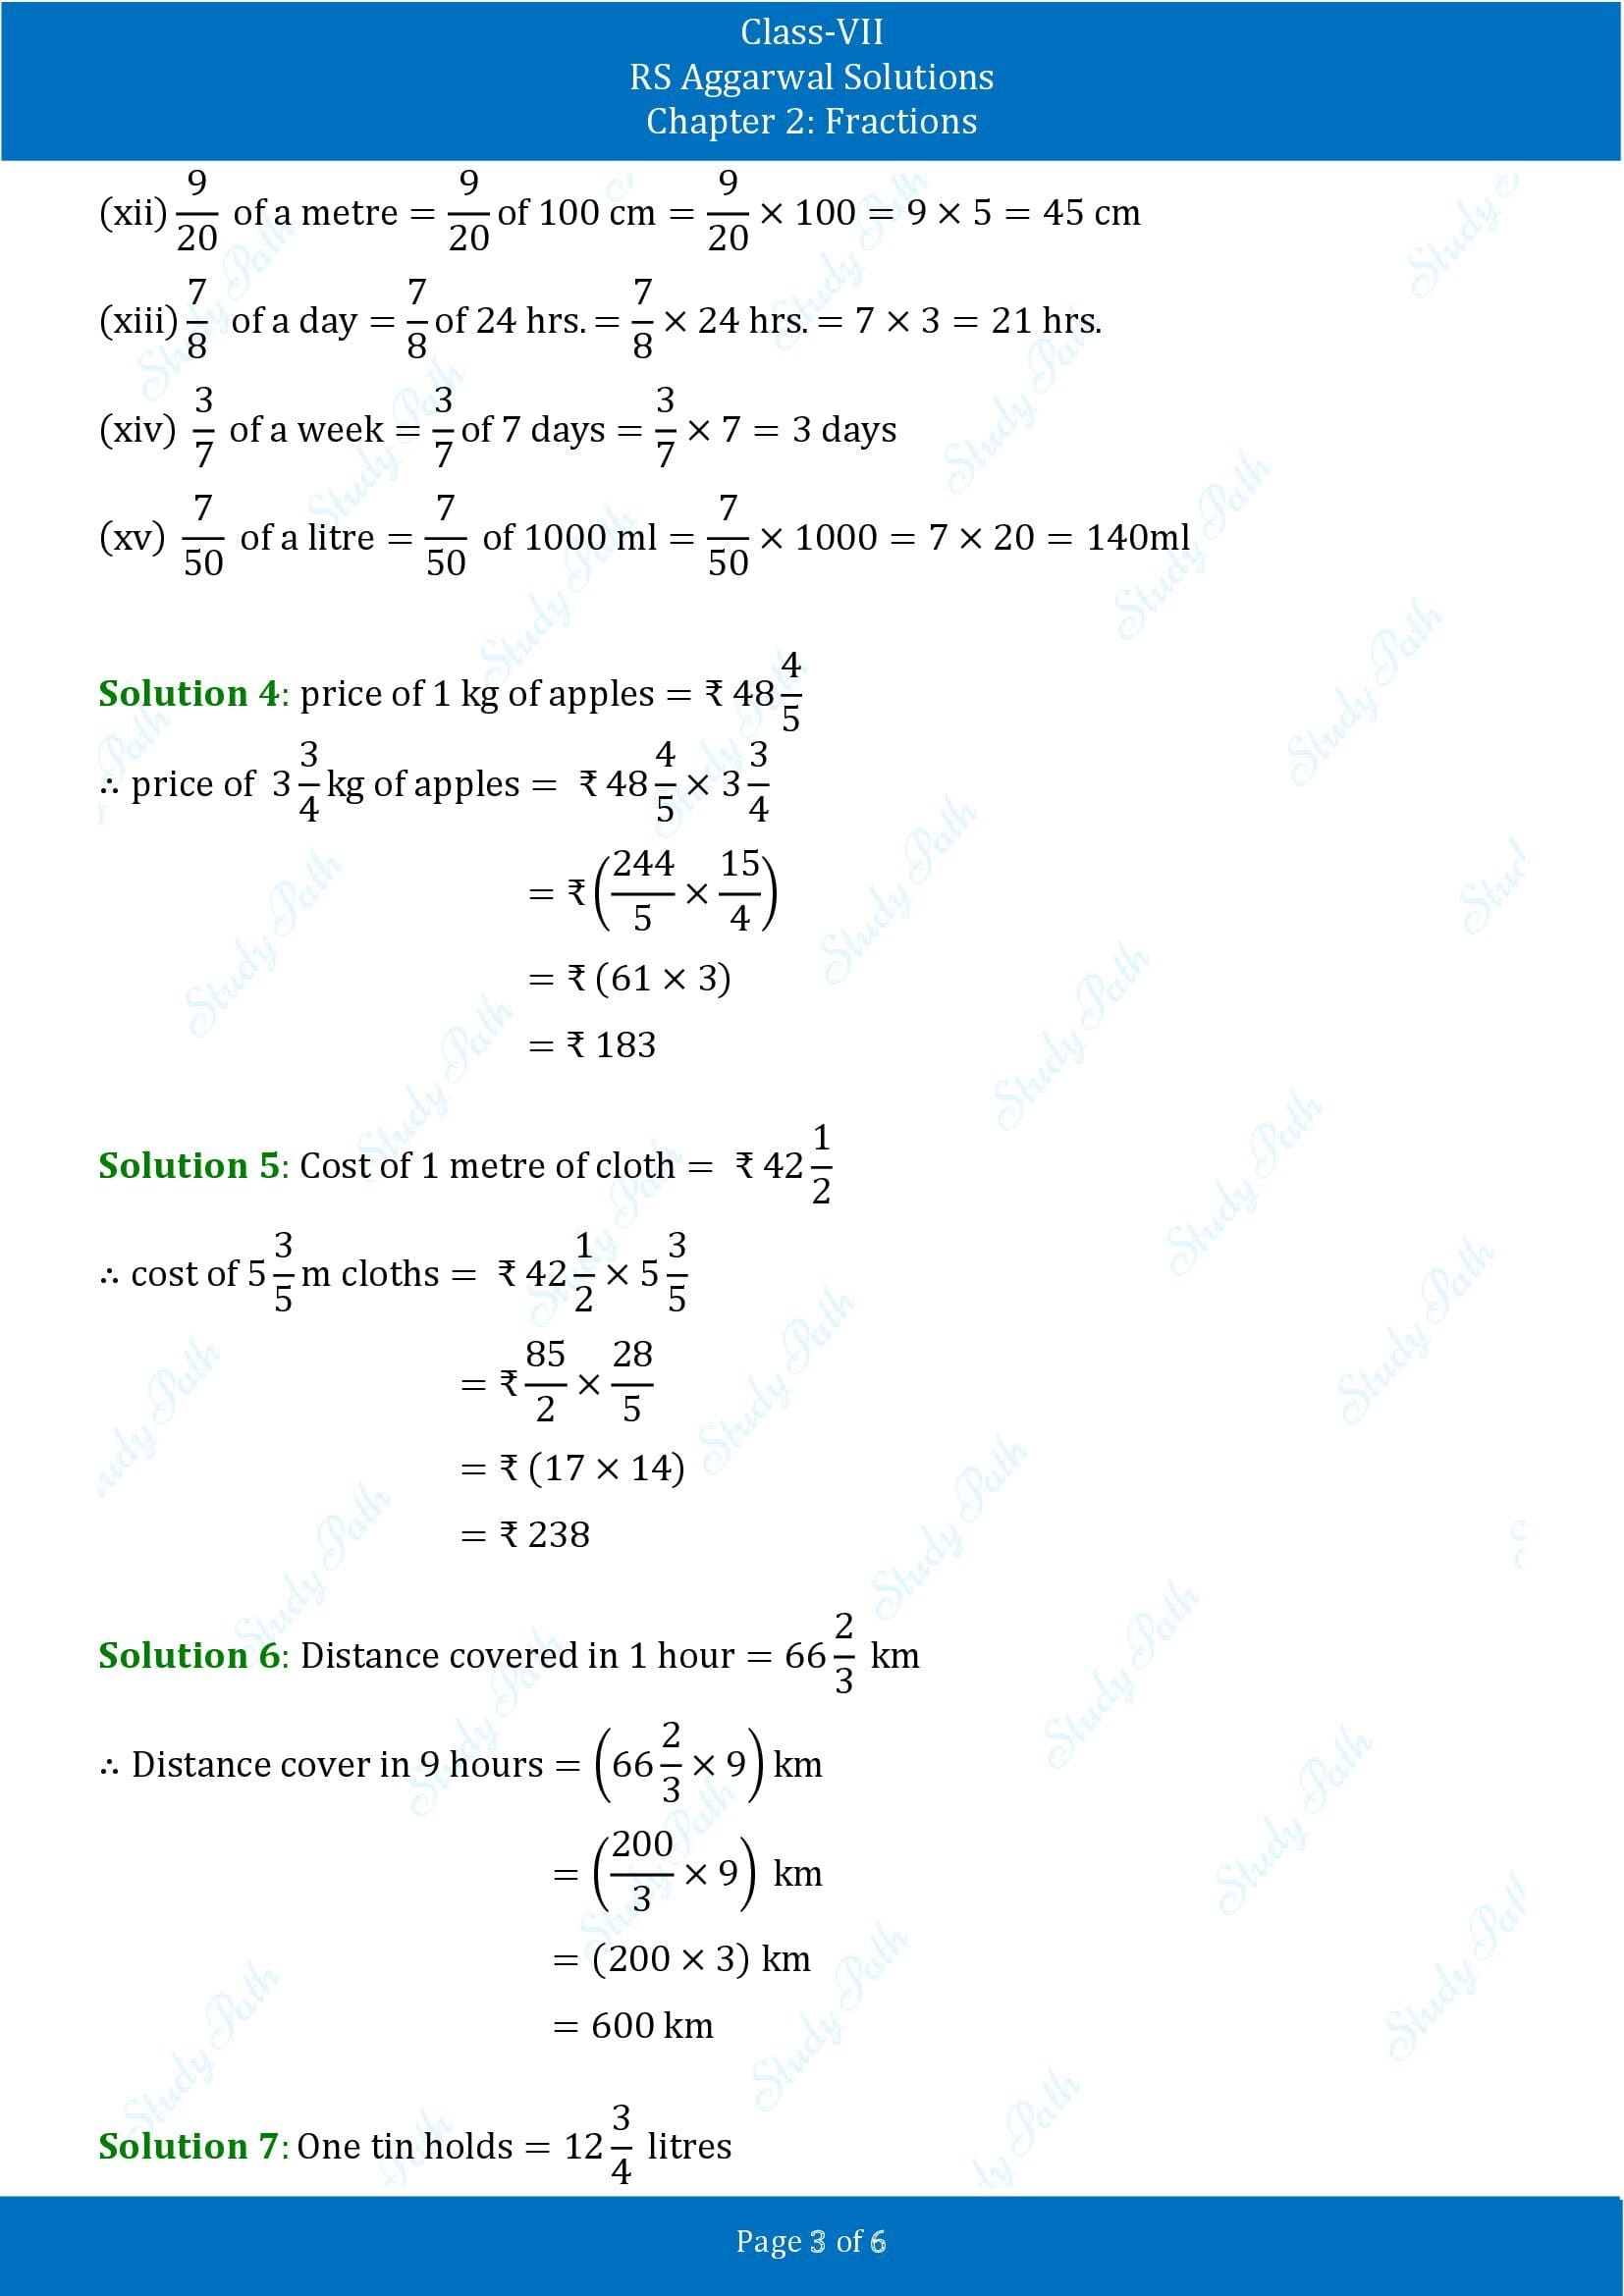 RS Aggarwal Solutions Class 7 Chapter 2 Fractions Exercise 2B 00003